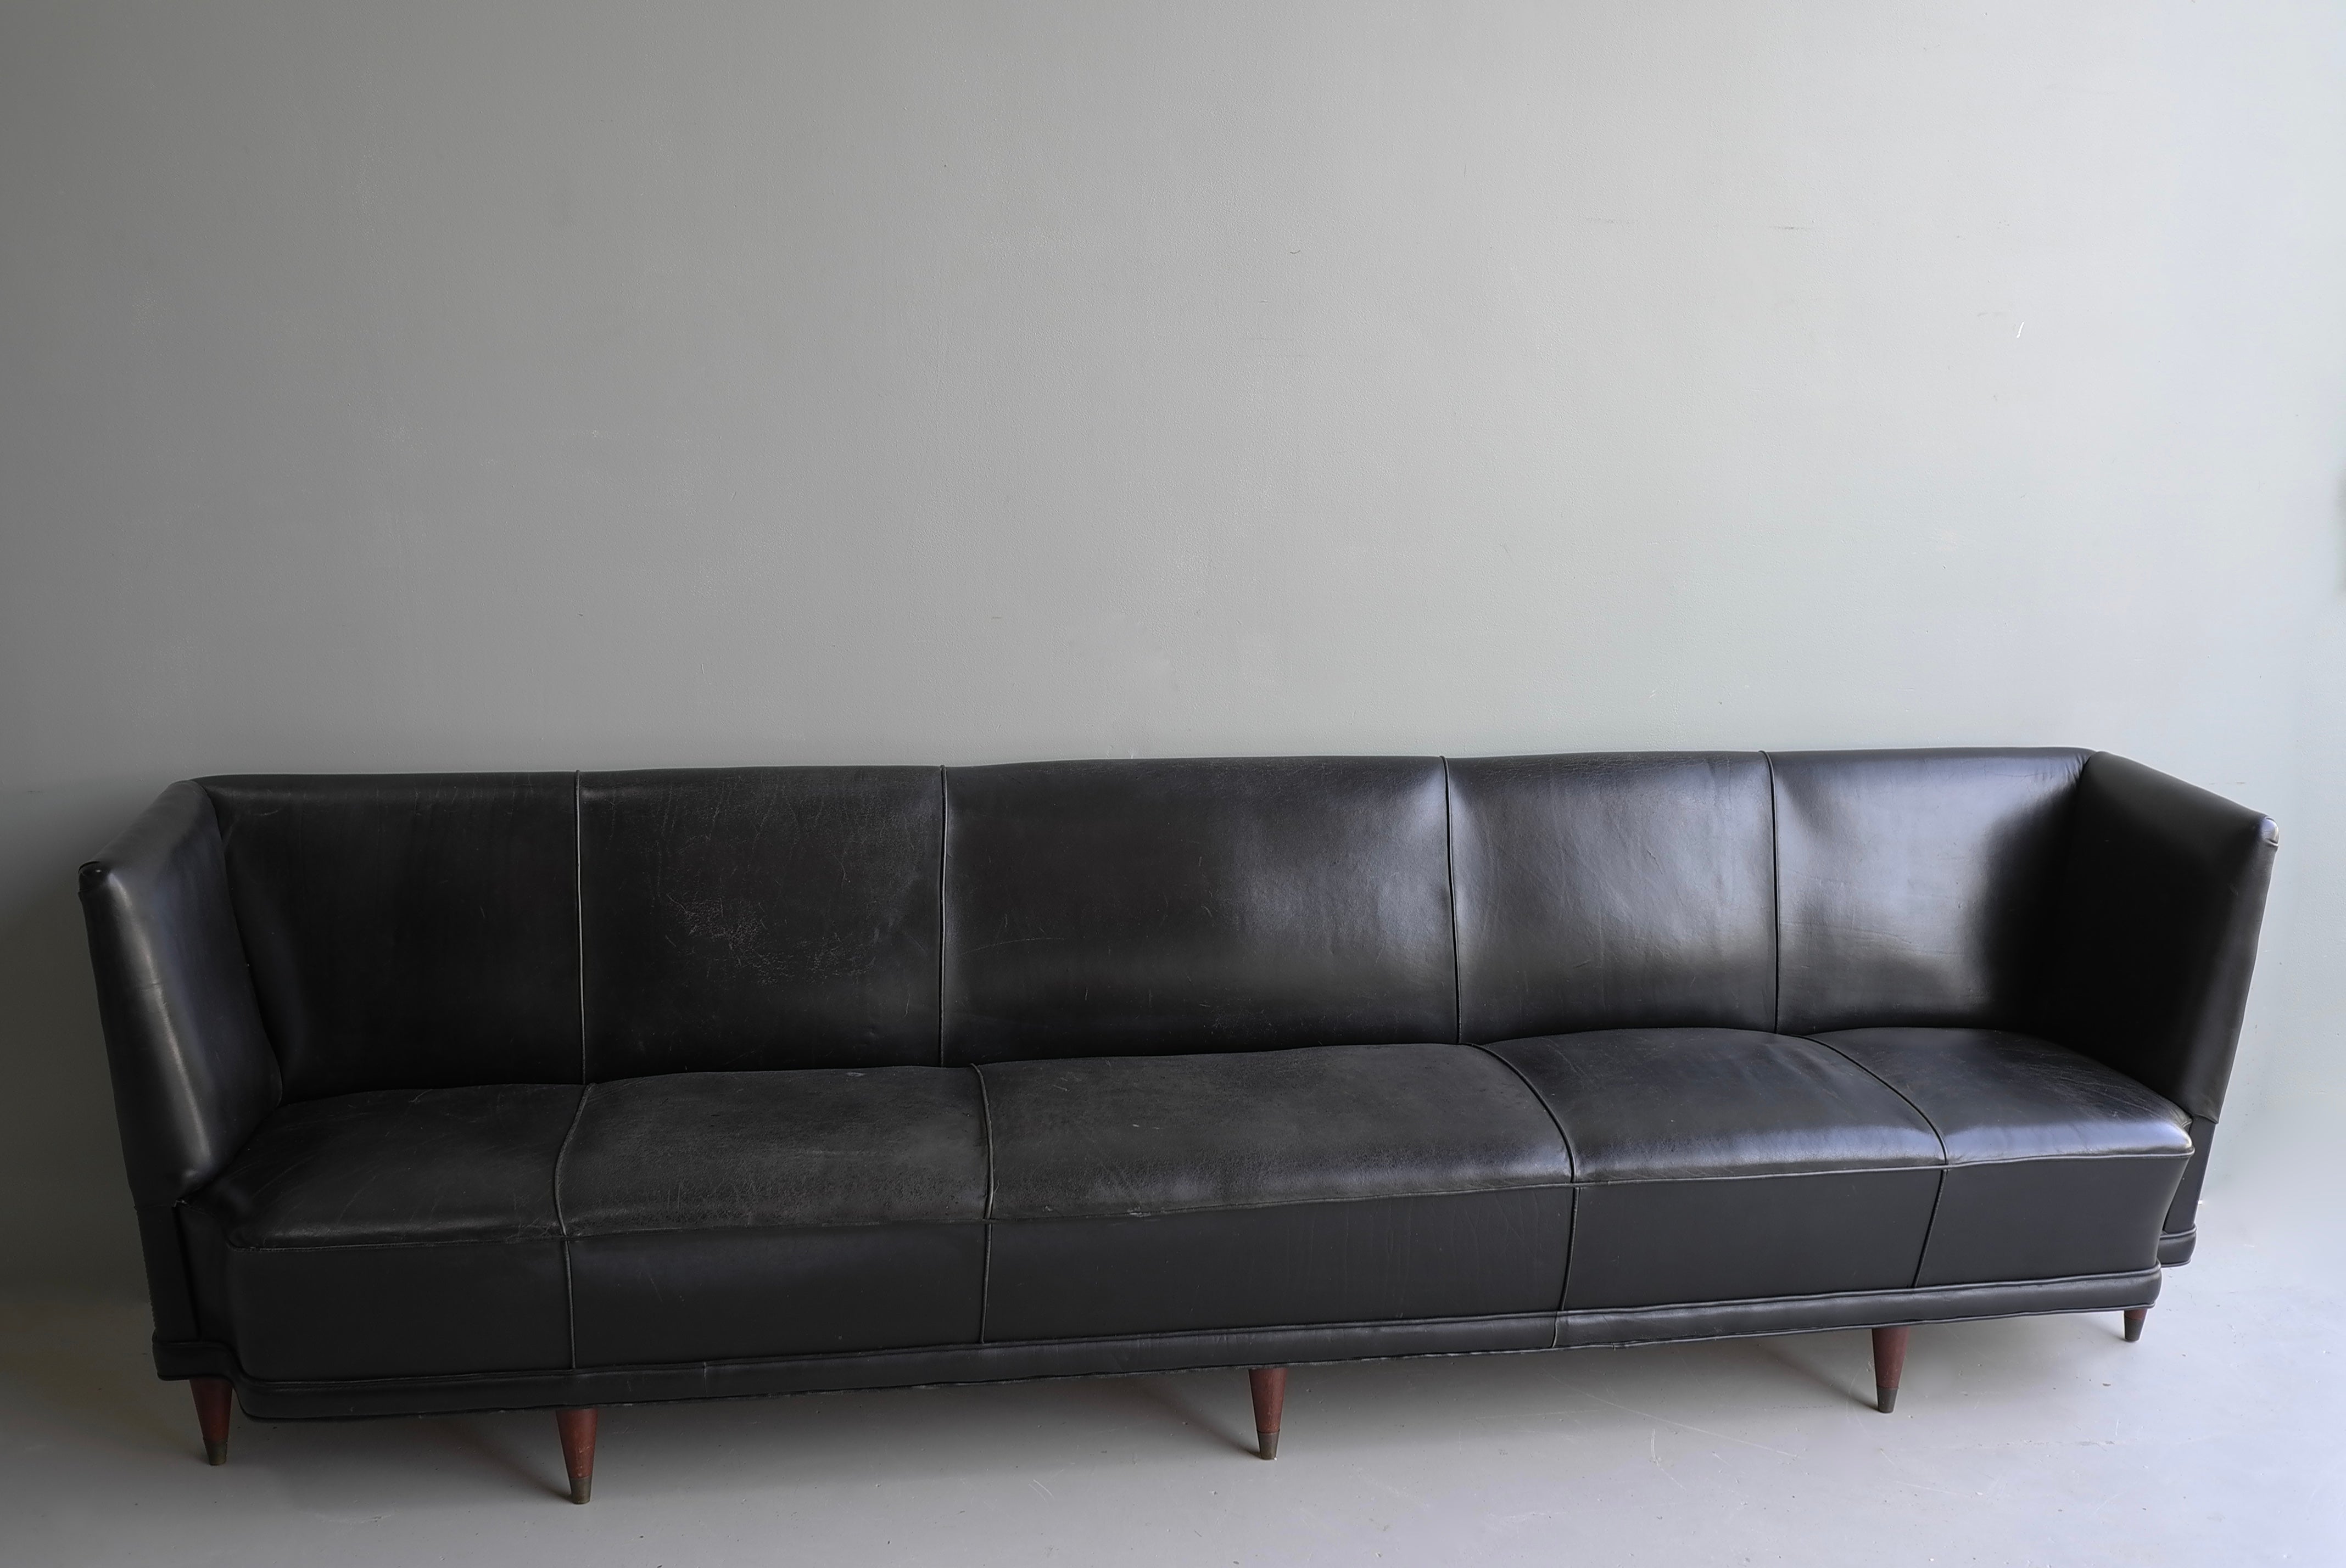 Extra large black leather cabinet maker Italian sofa 1950's.

The sofa was ordered from Italy by a famous Dutch Bank late 1950's.
It was a special order for the large entrance hall that needed wideness furniture.
This large high quality sofa has